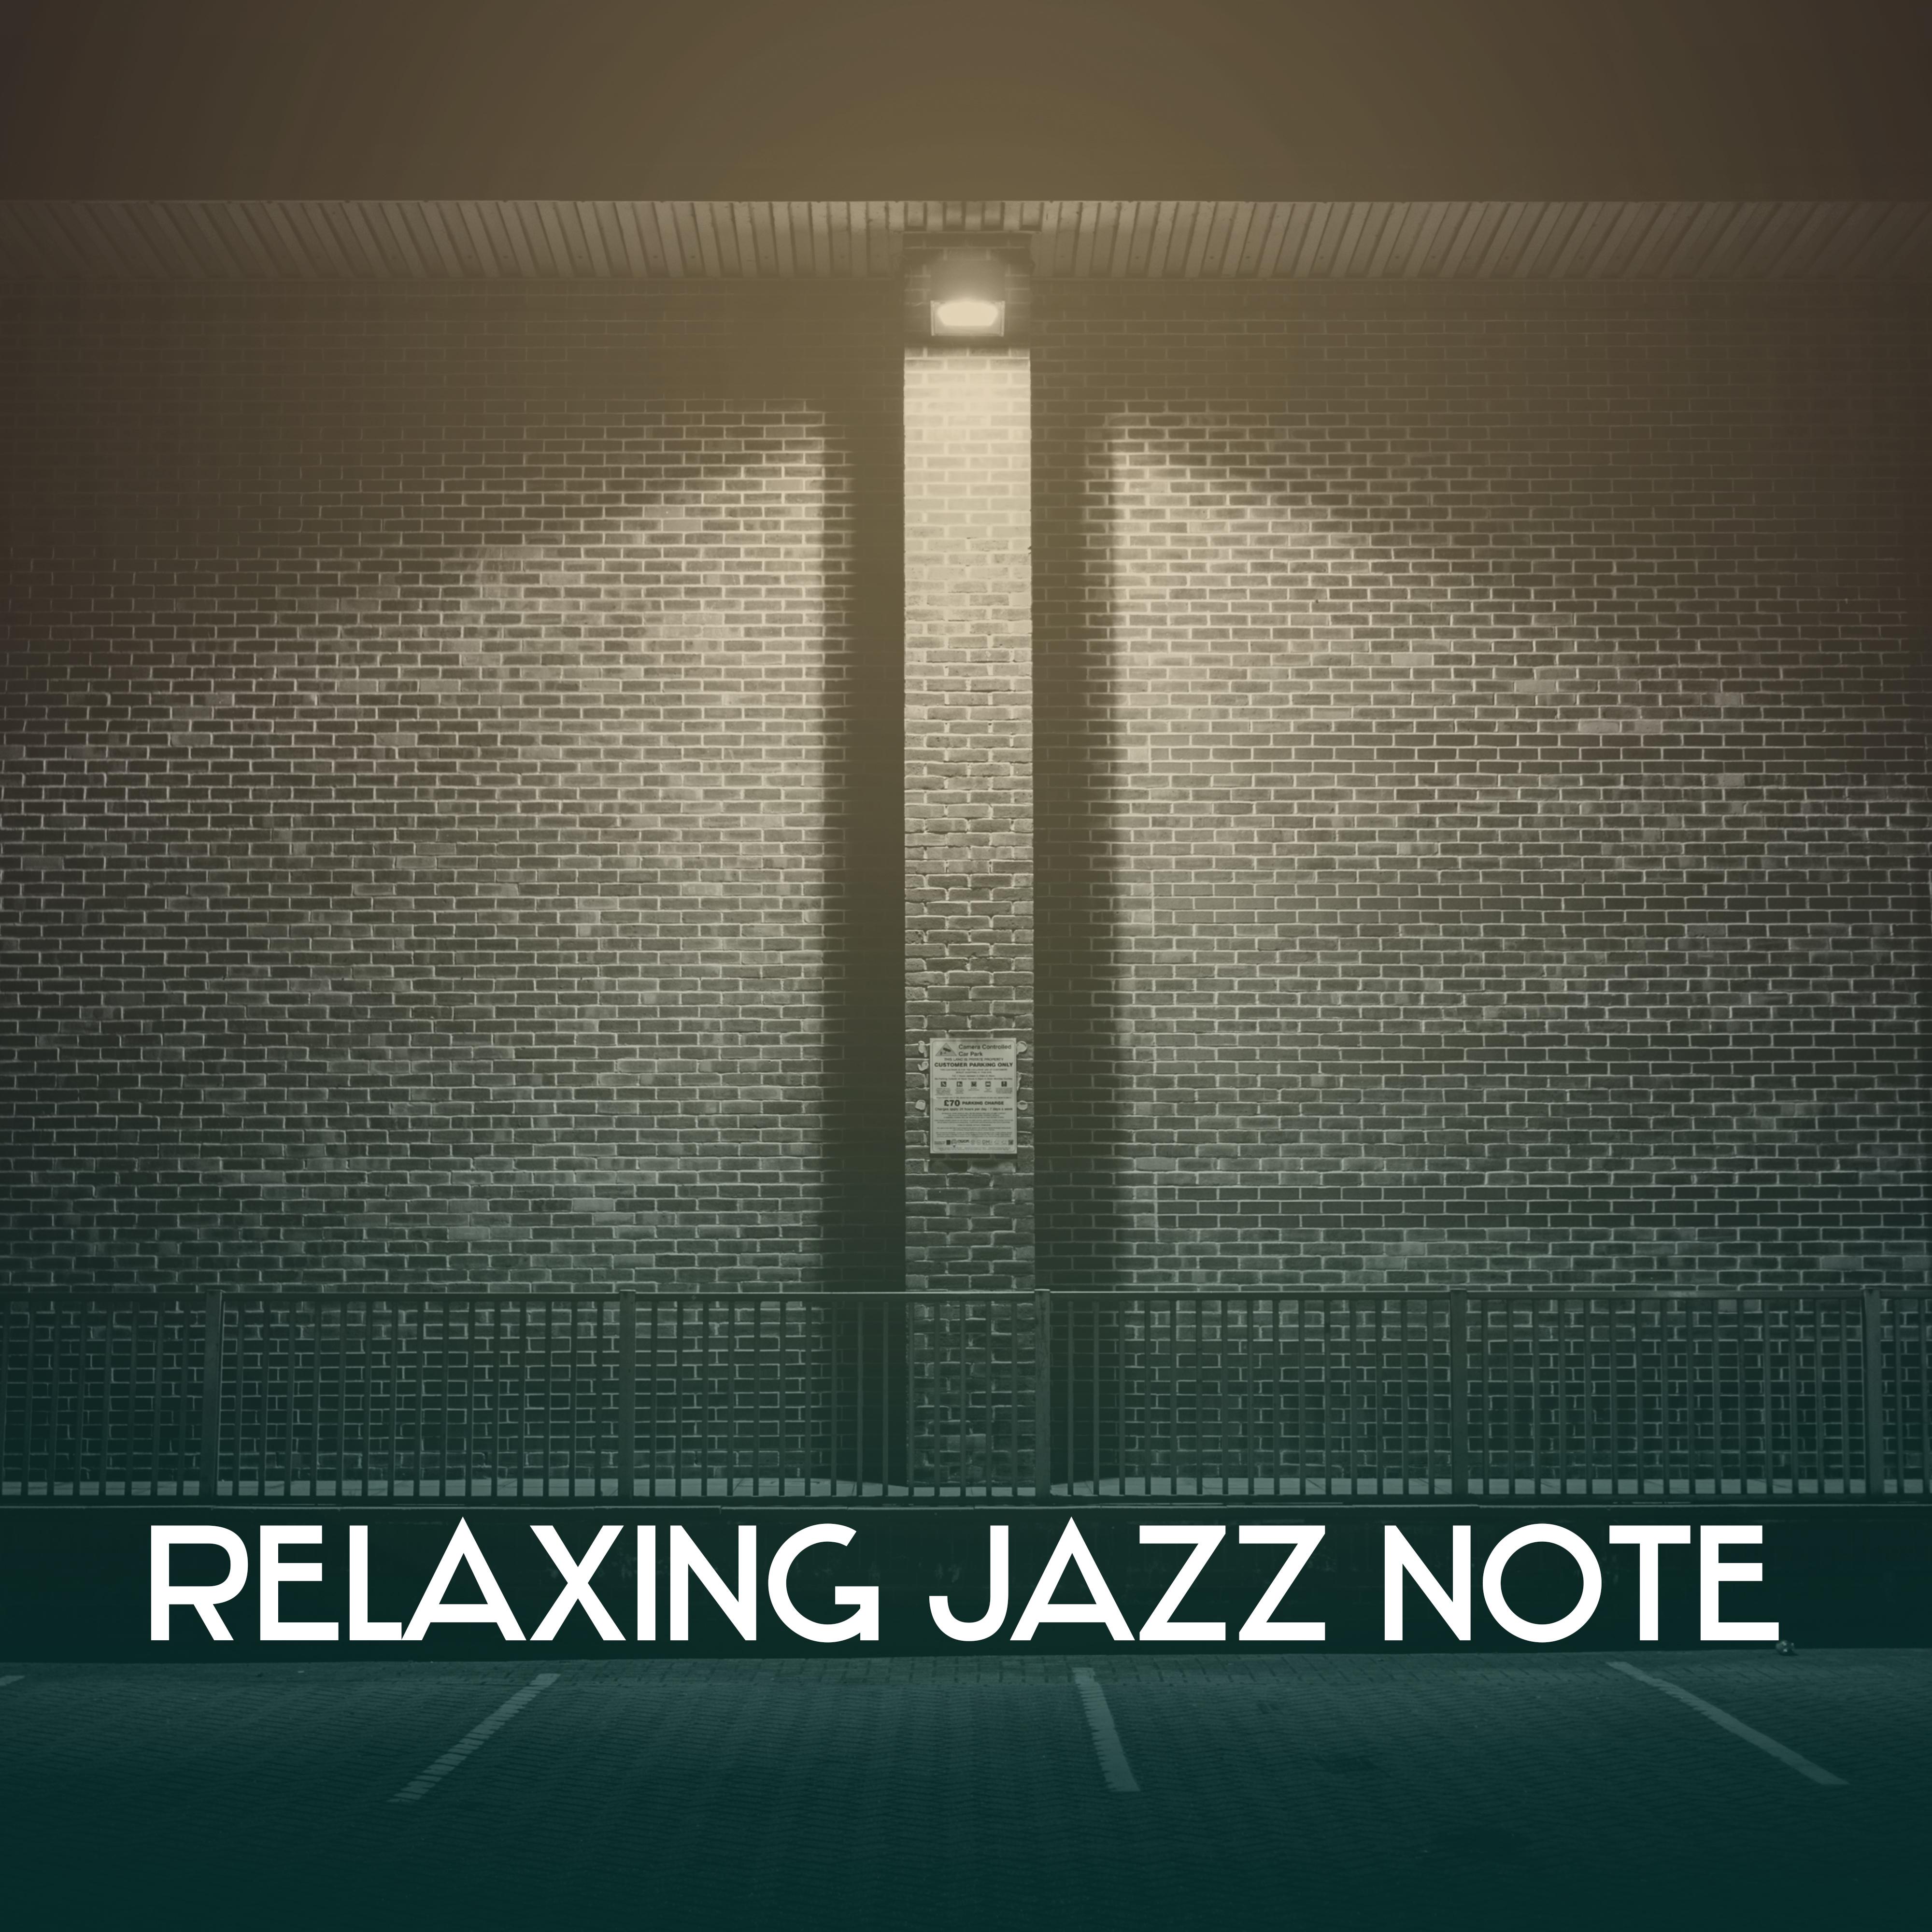 Relaxing Jazz Note  Smooth Jazz Music, Piano Bar, Rest  Relax, Easy Listening, Jazz Lounge, Mellow Sounds